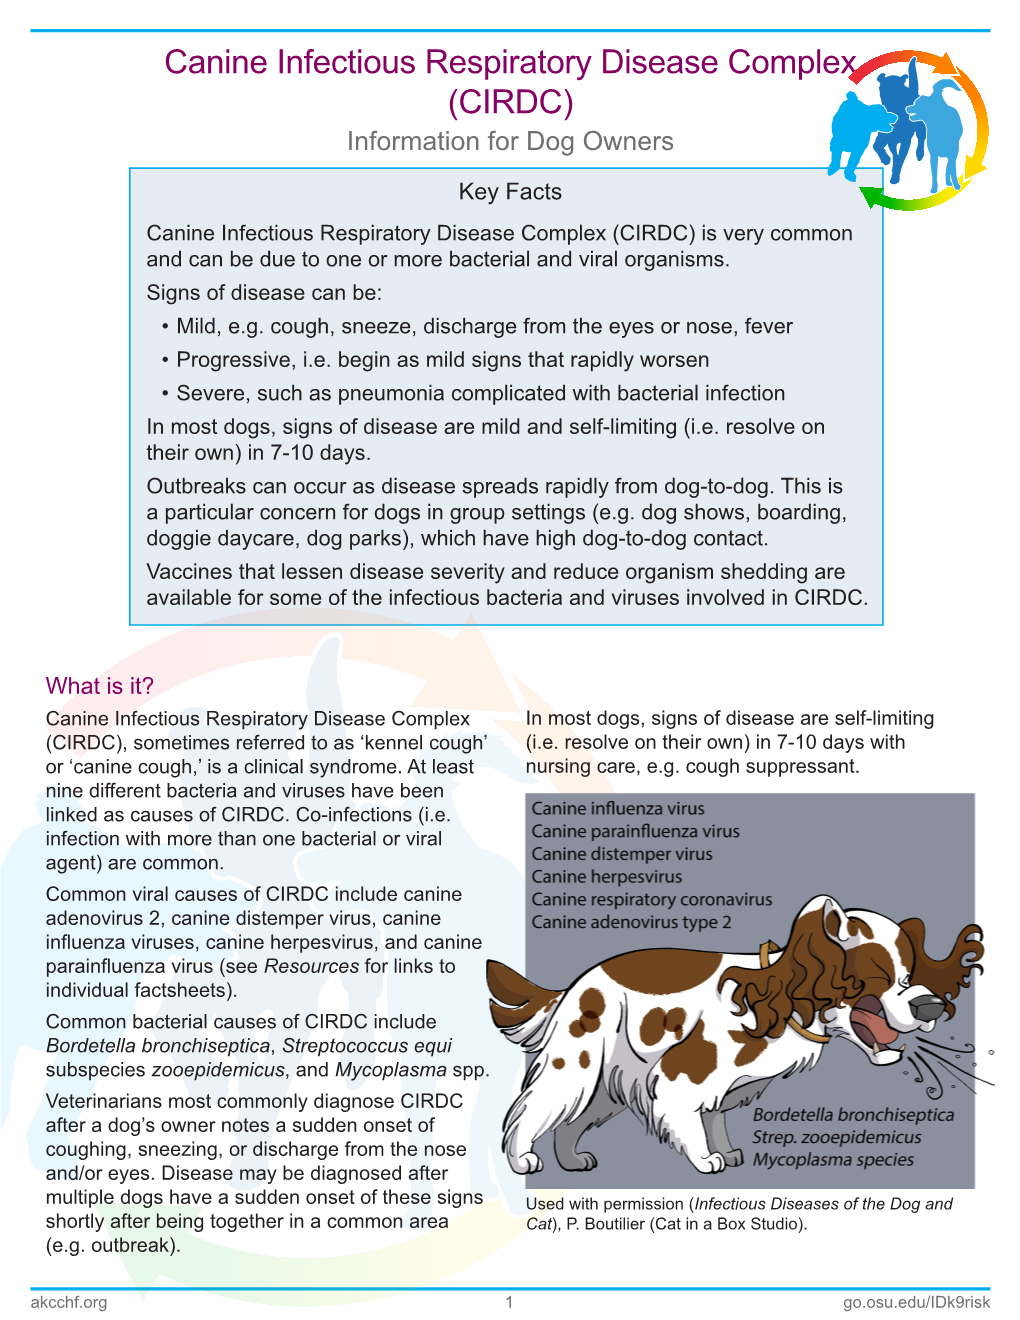 Canine Infectious Respiratory Disease Complex (CIRDC) Information for Dog Owners